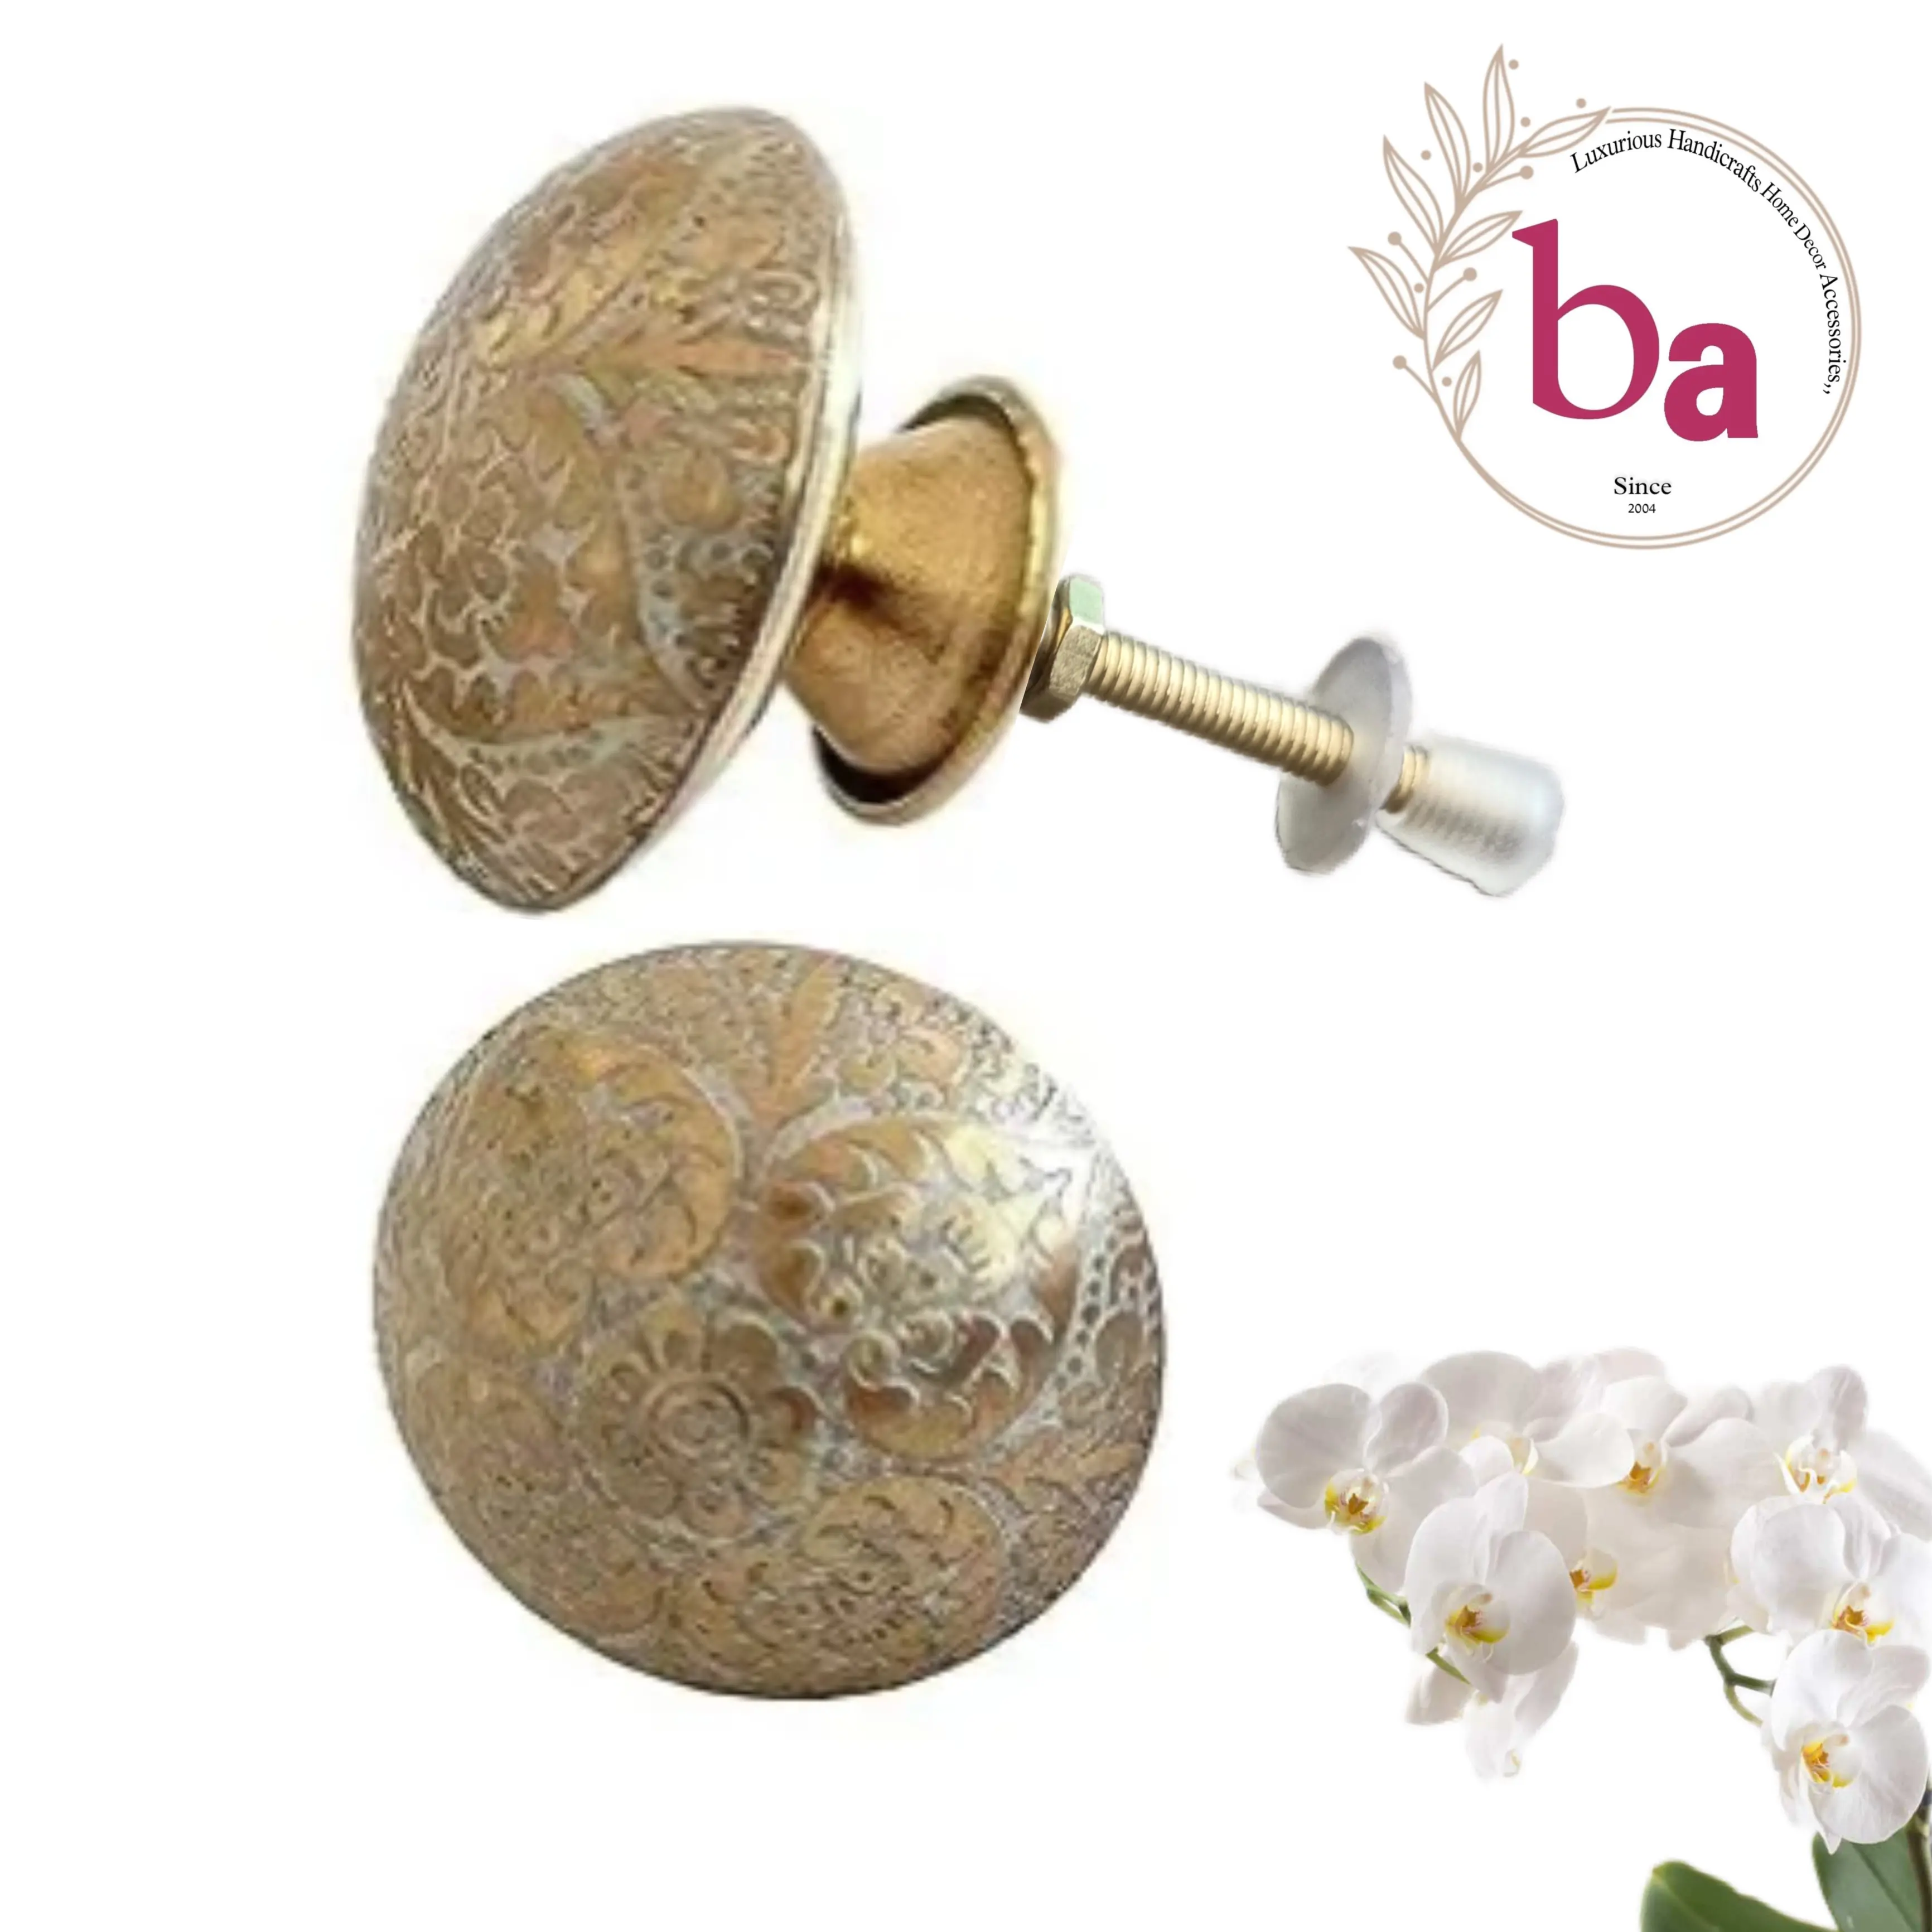 Export Quality Brass Etched knob drawer door cabinet knobs & Pull Handle [HBRMW 221]